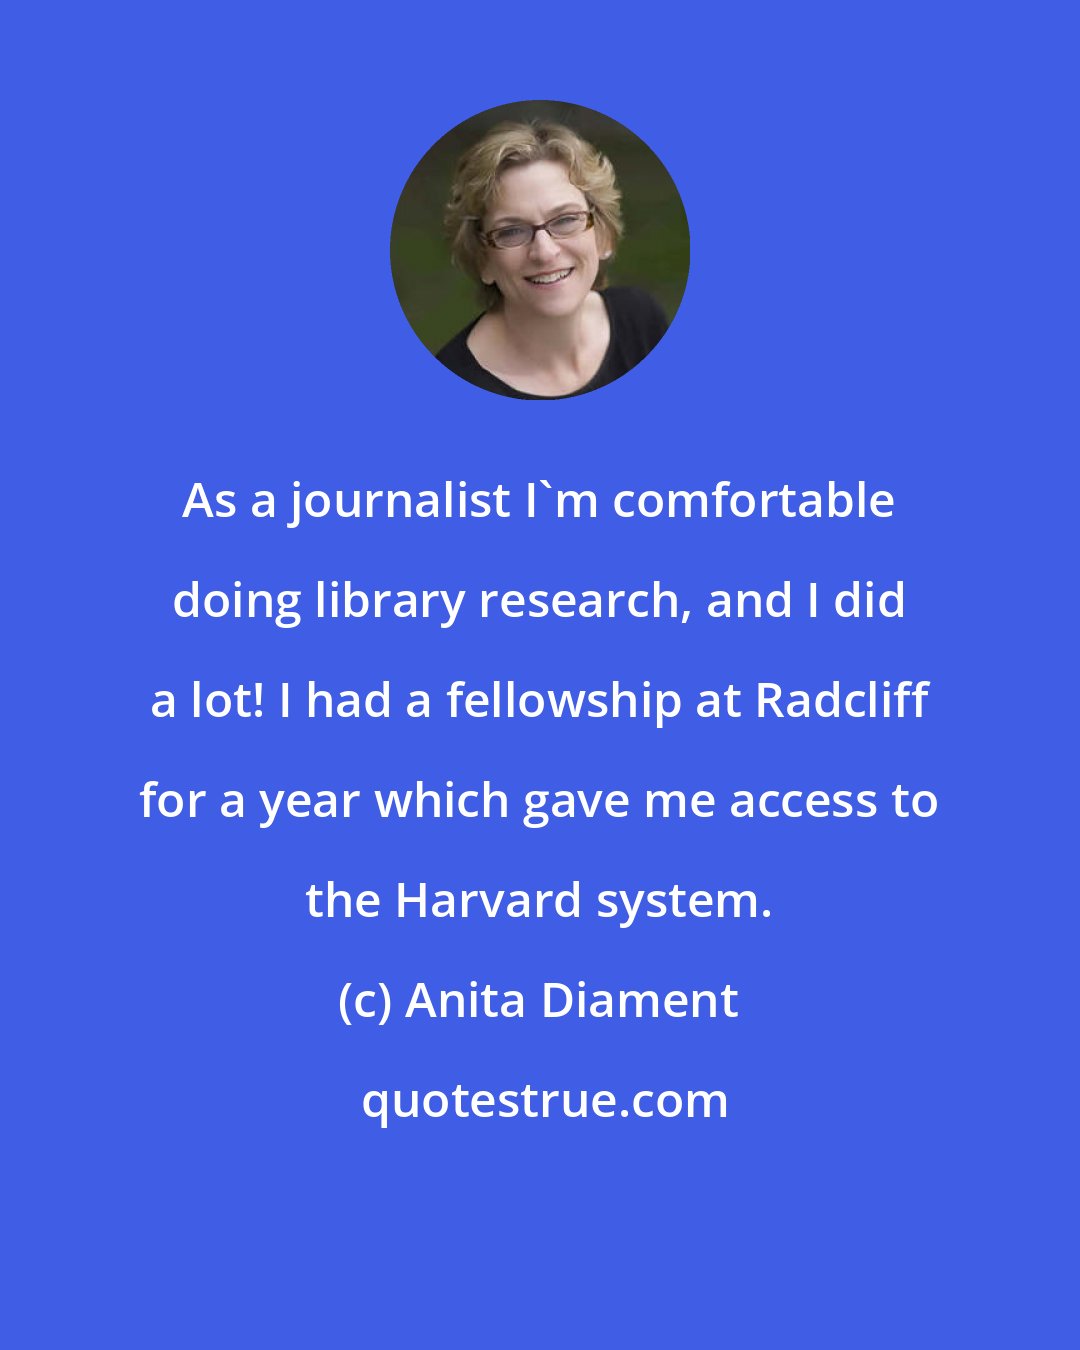 Anita Diament: As a journalist I'm comfortable doing library research, and I did a lot! I had a fellowship at Radcliff for a year which gave me access to the Harvard system.